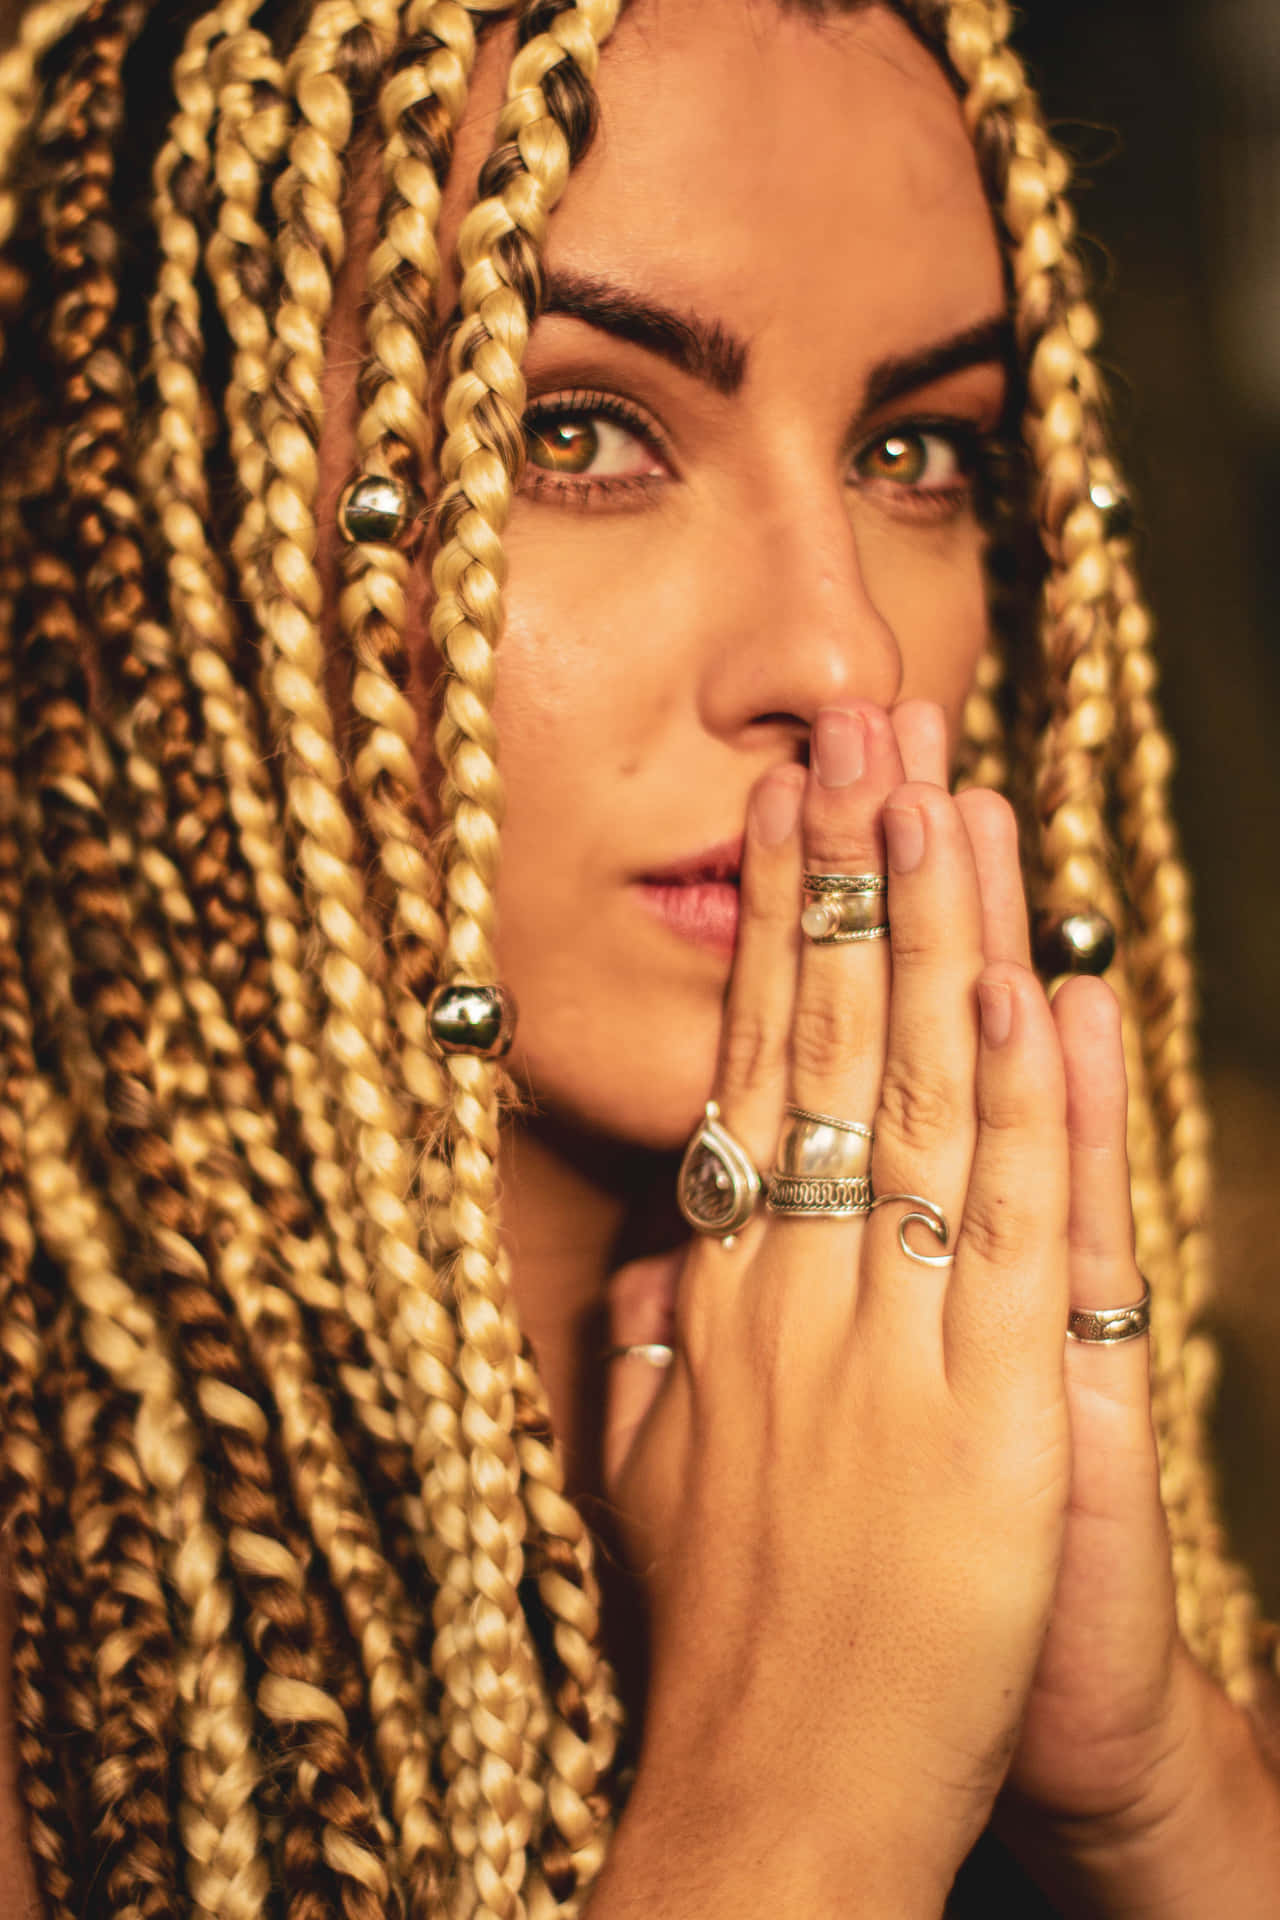 A Woman With Braids And Rings On Her Hands